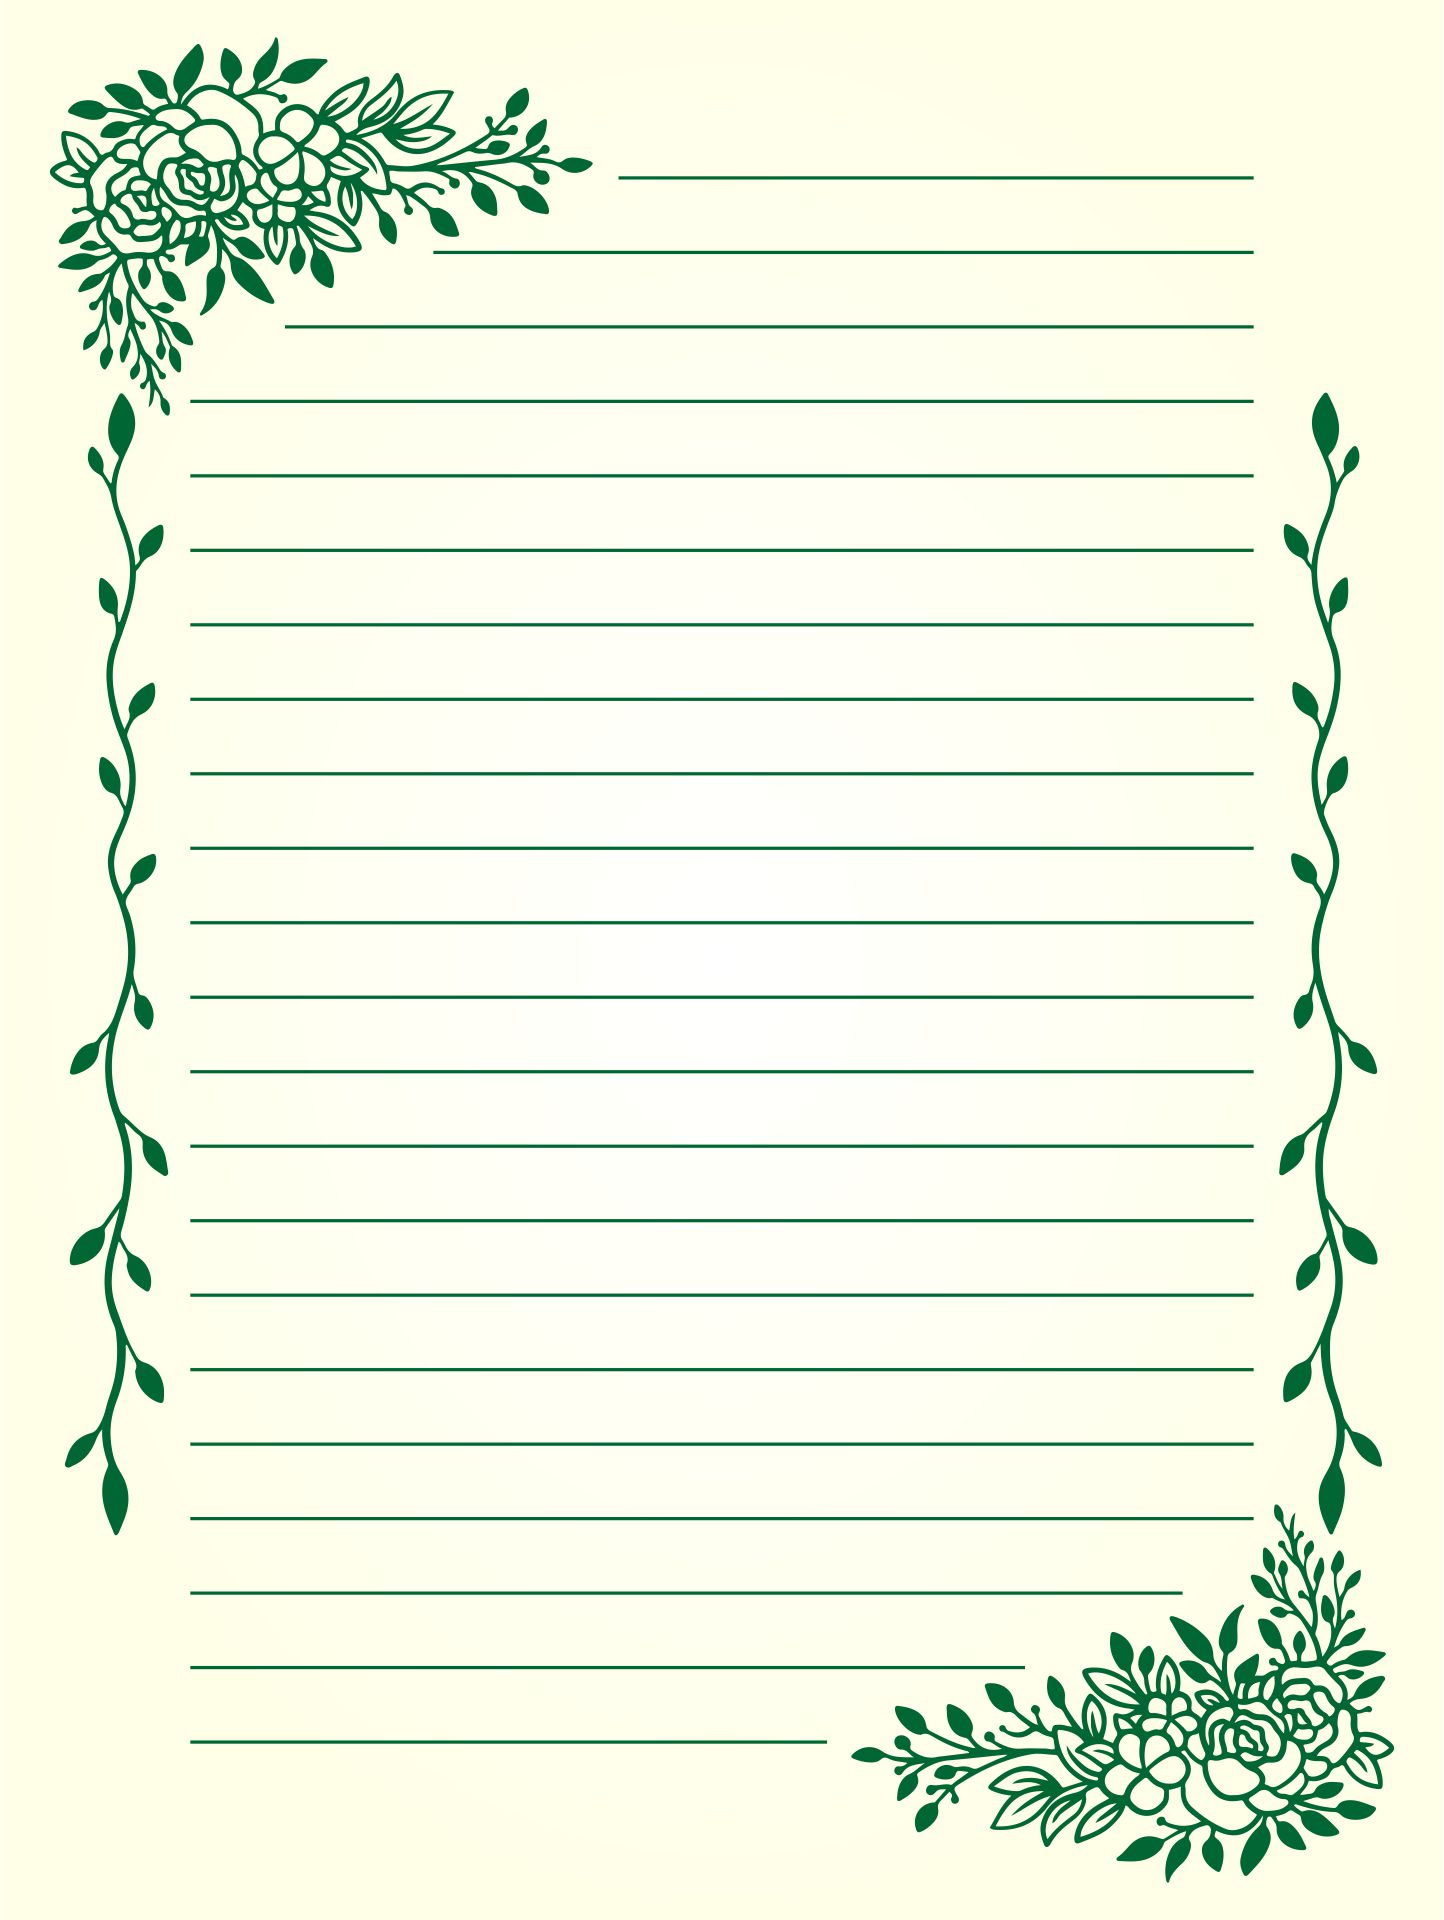 Printable Stationary With Lines Free Printable Templates